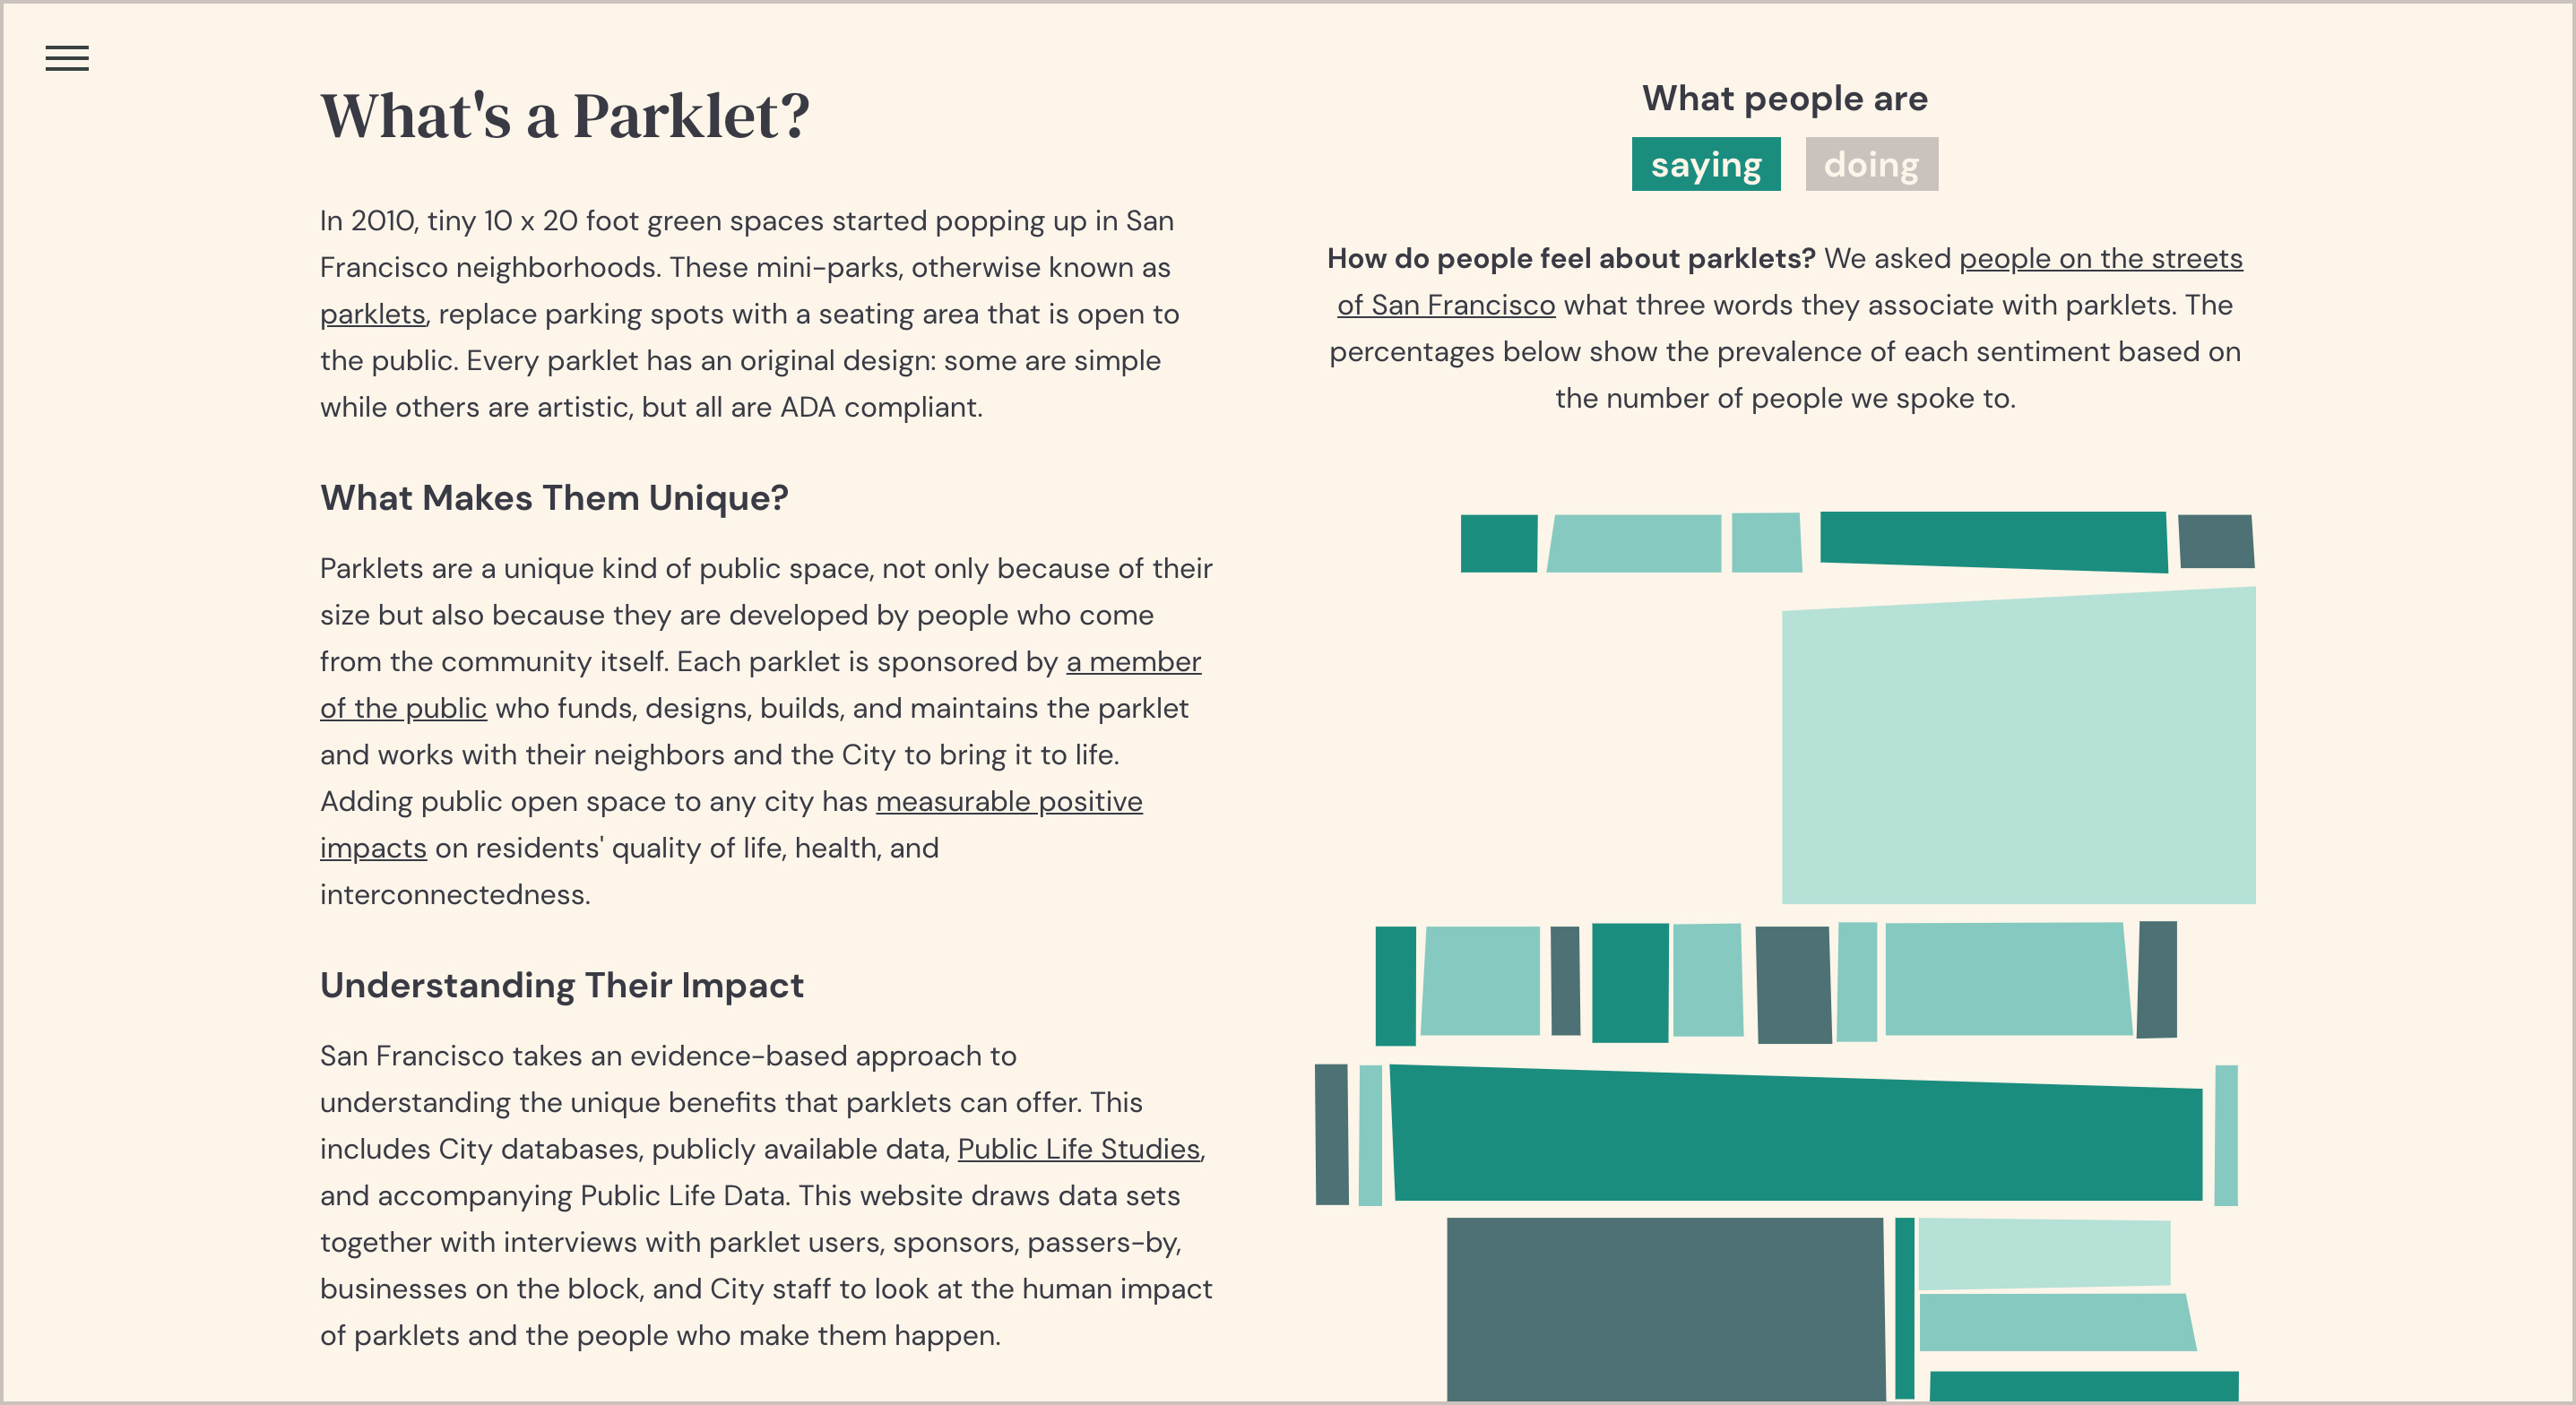 Section 1: What is a Parklet